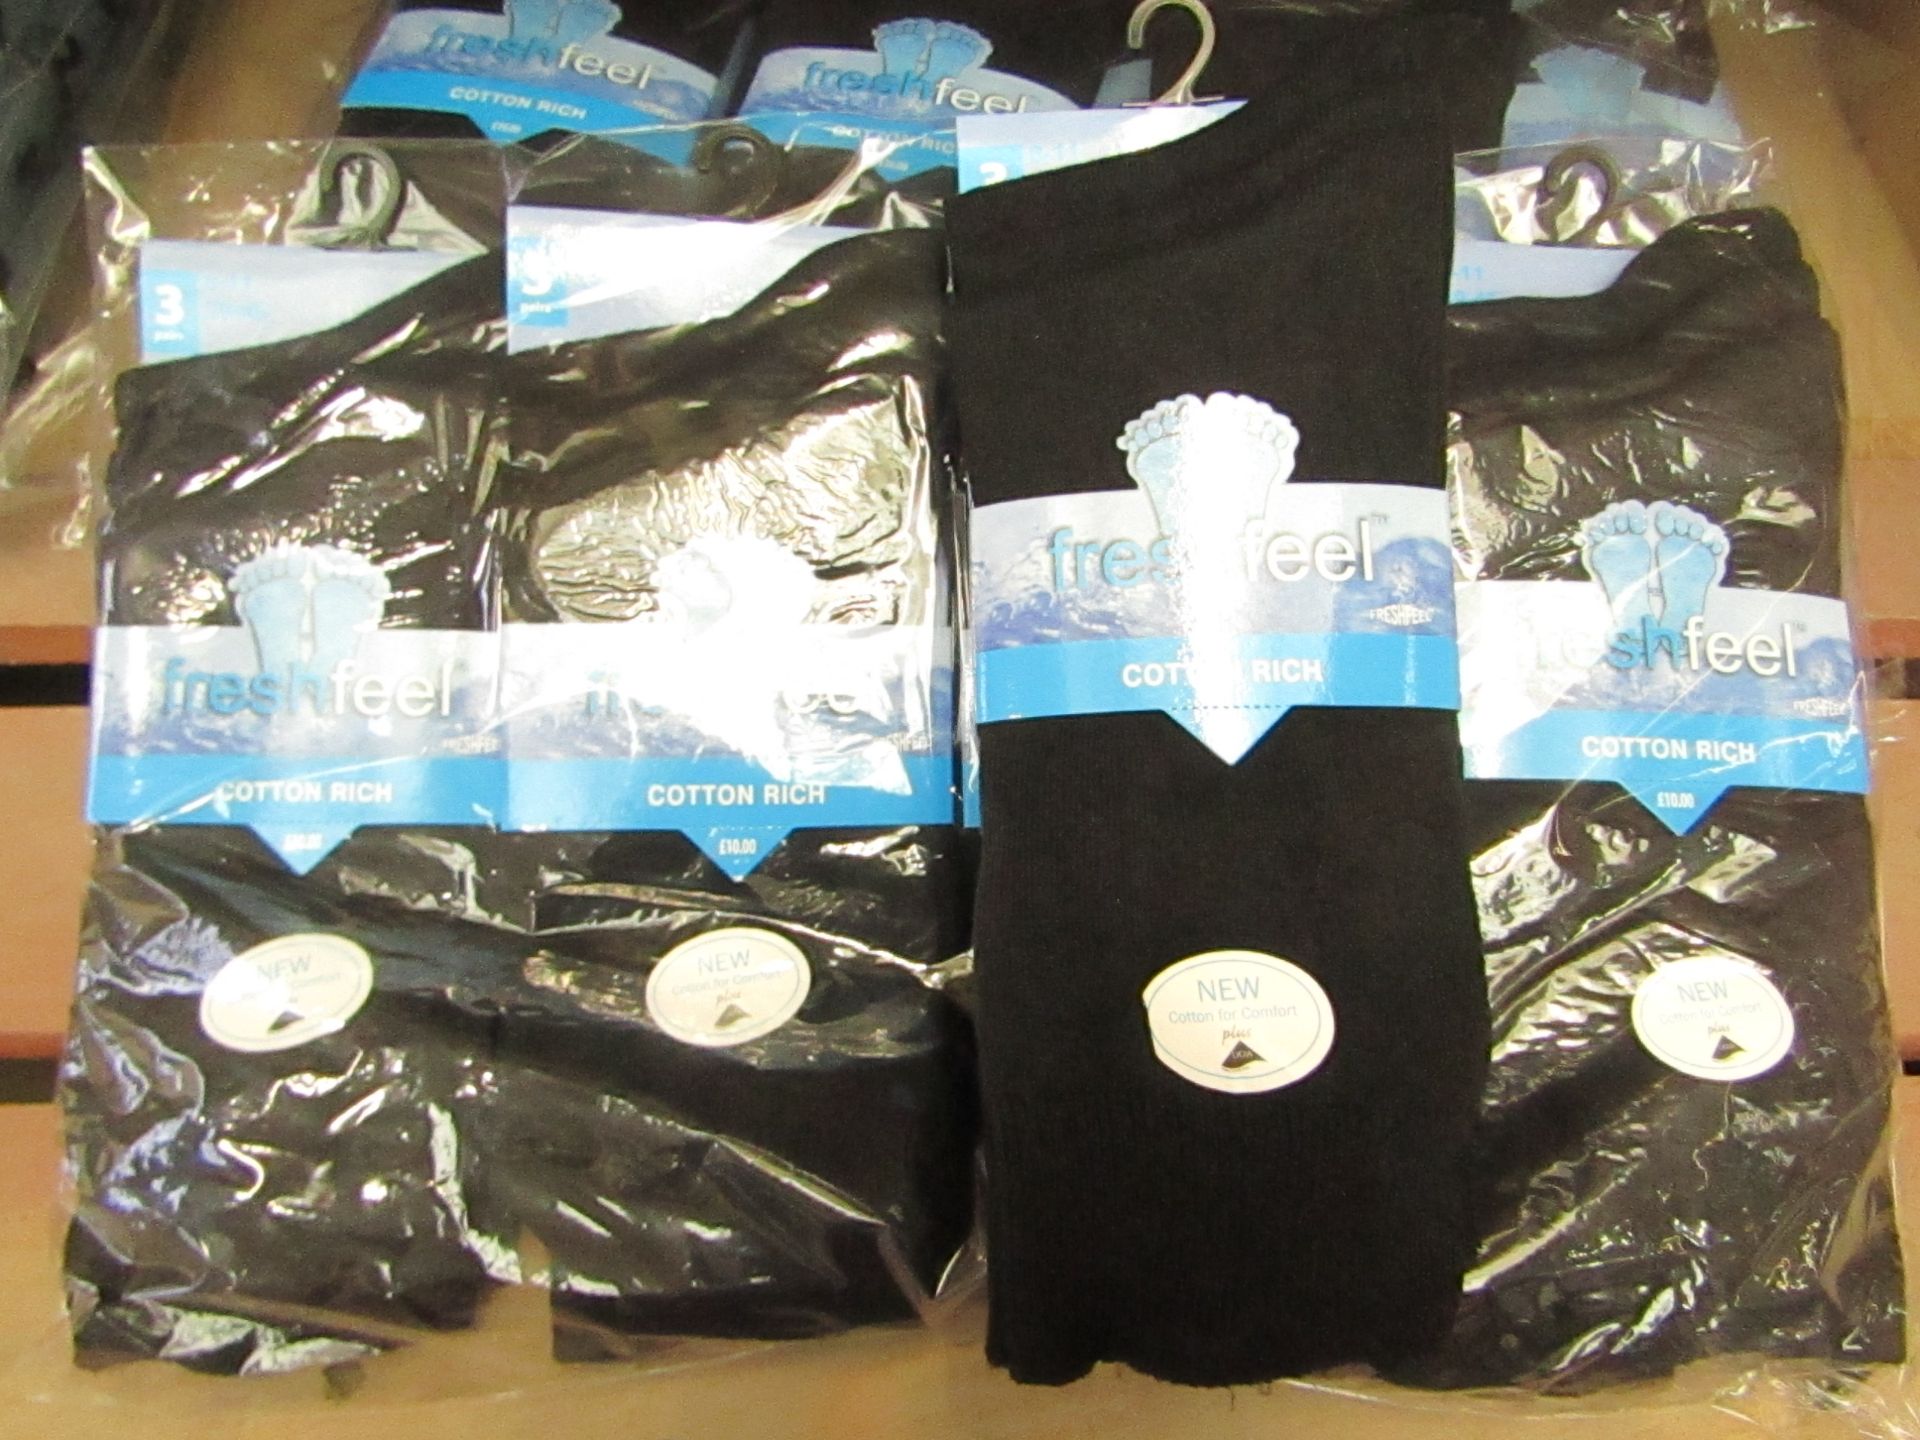 12 X Pairs of Mens Fresh Feel Black Cotton Rich Socks size 6-11 new in packaging